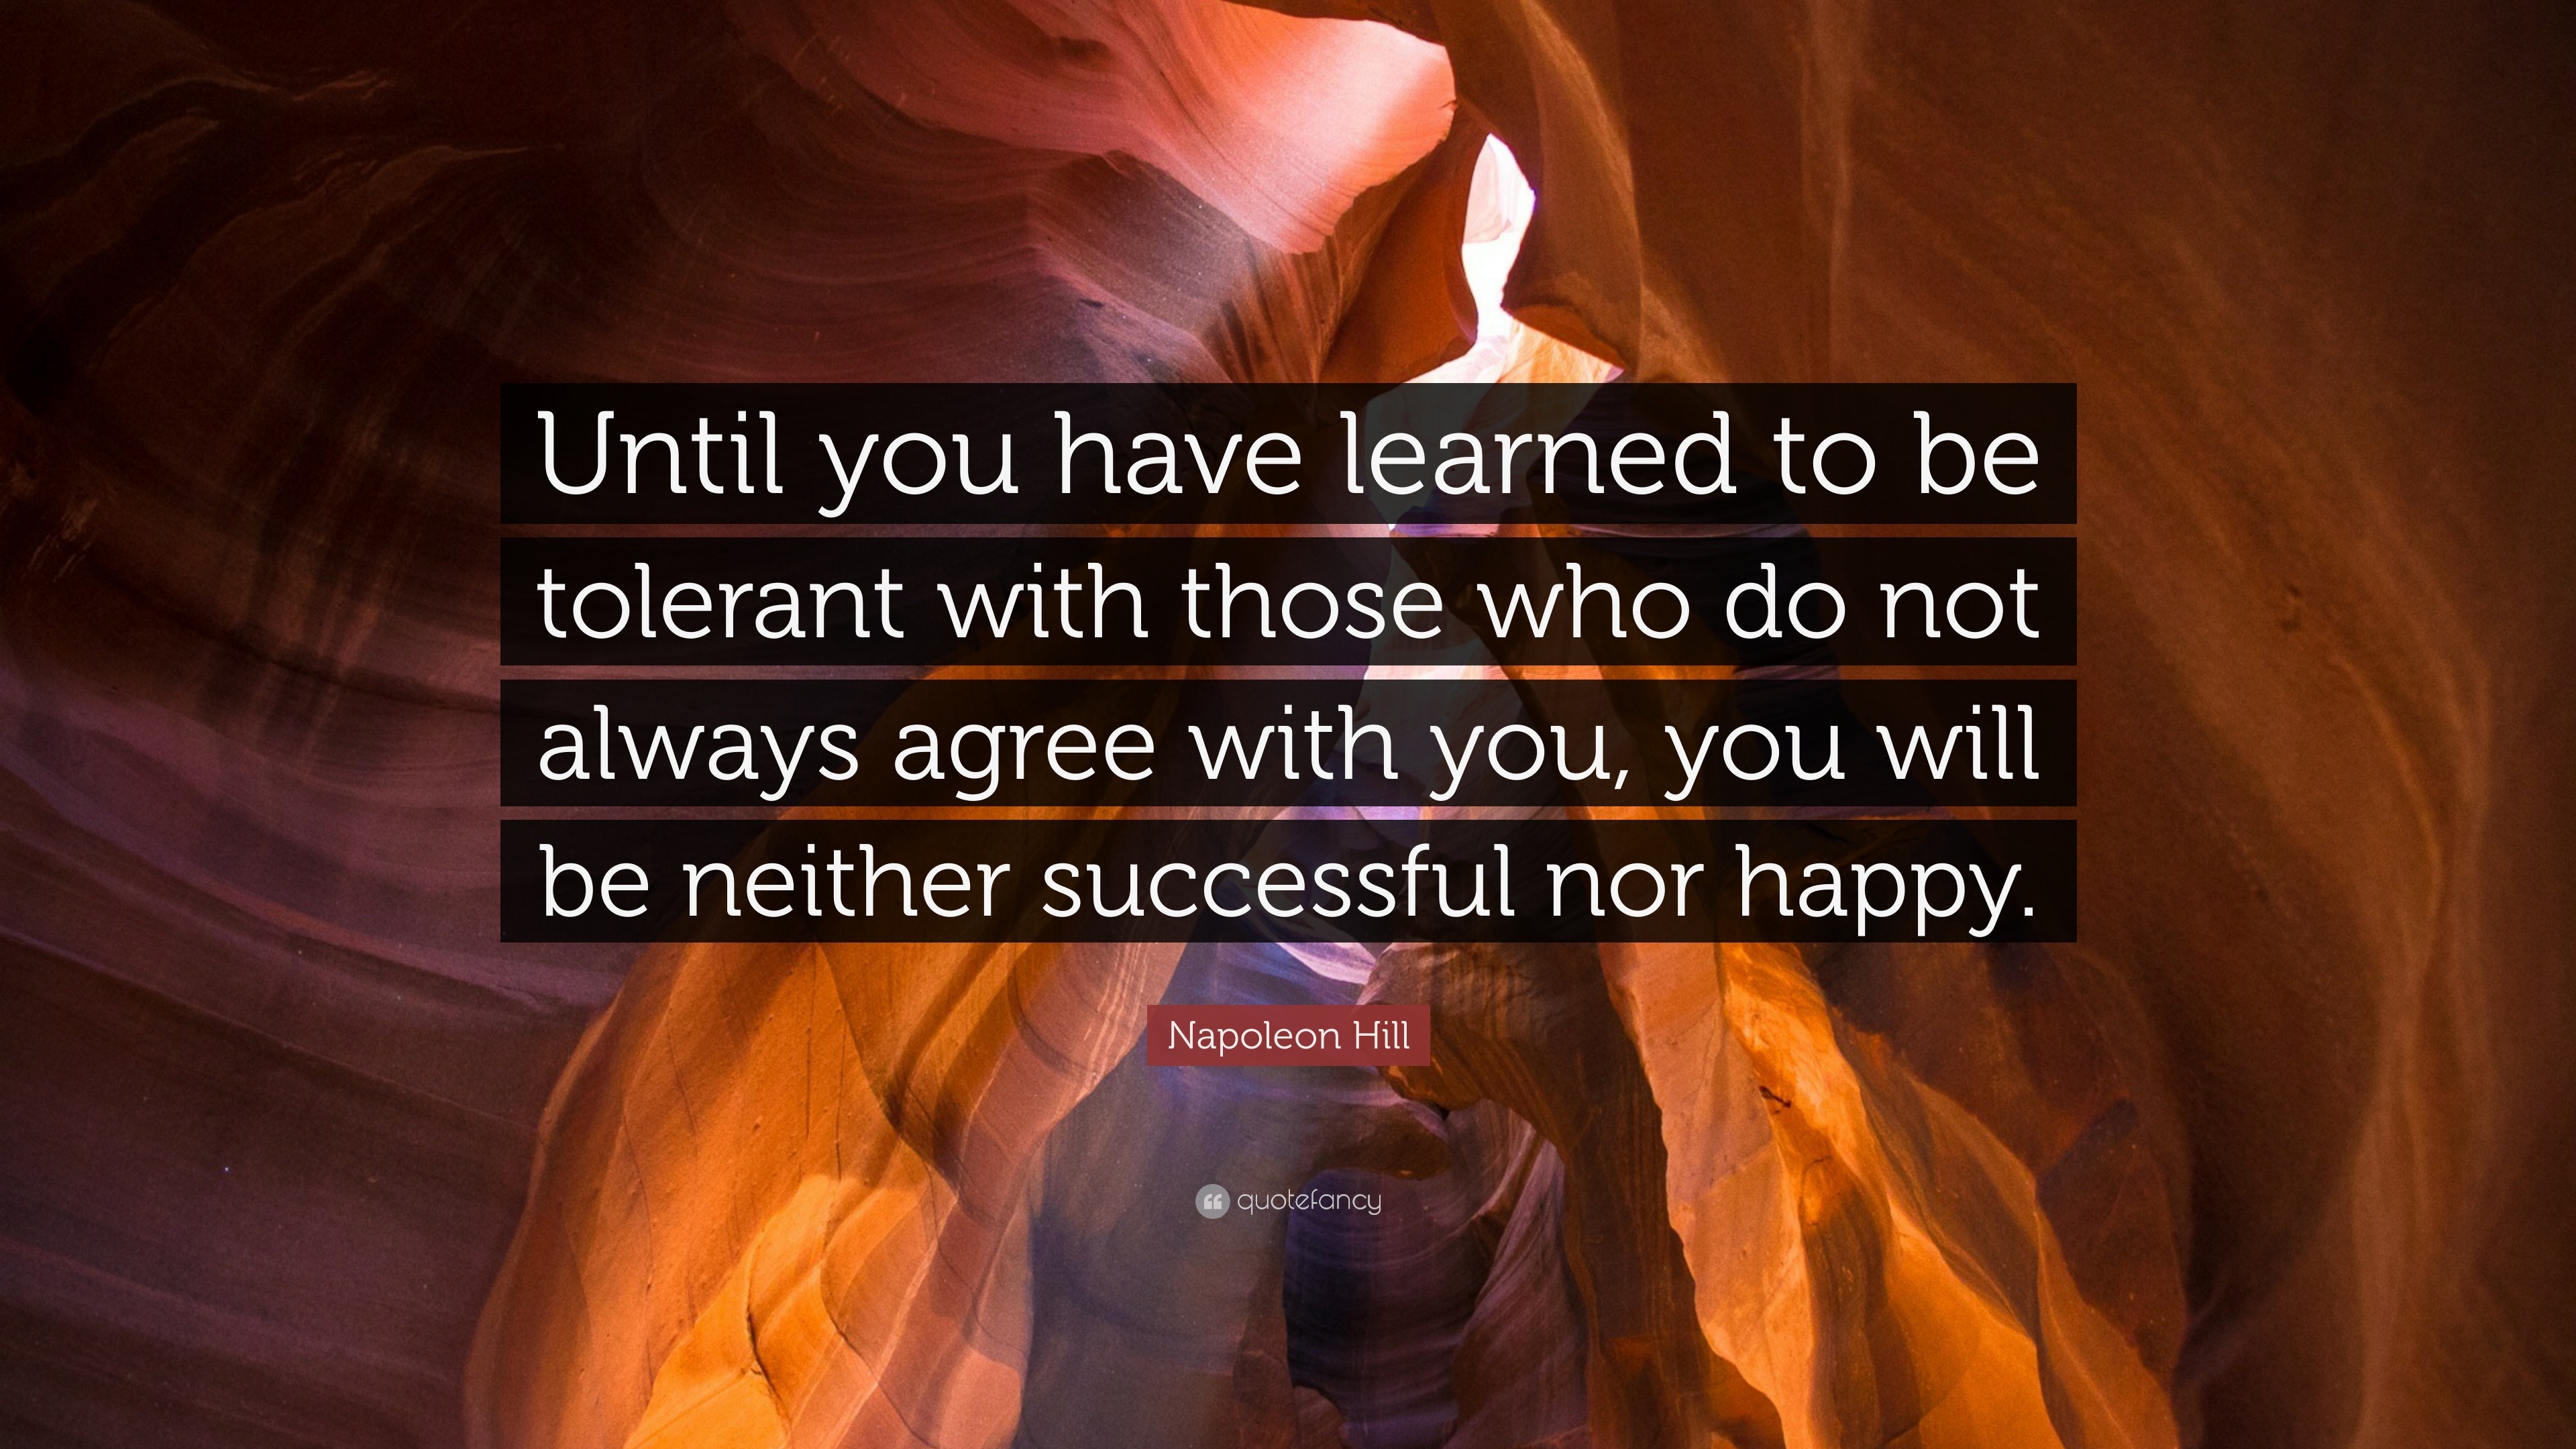 65+ Inspiring Napoleon Hill Quotes on Success